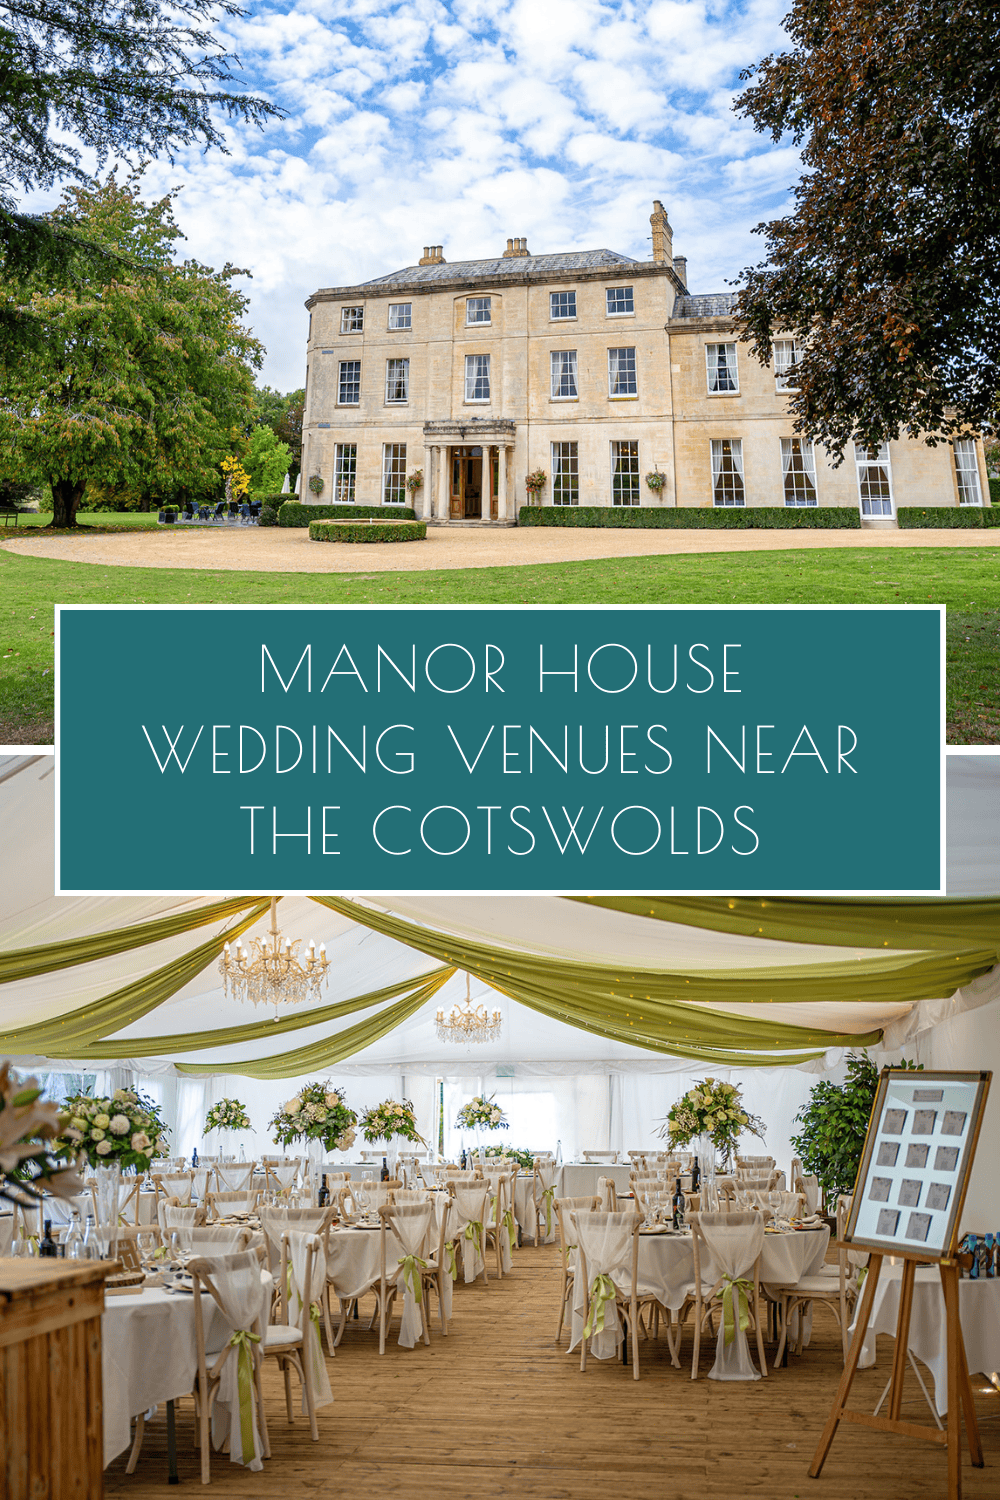 Manor house wedding venues near the cotswolds